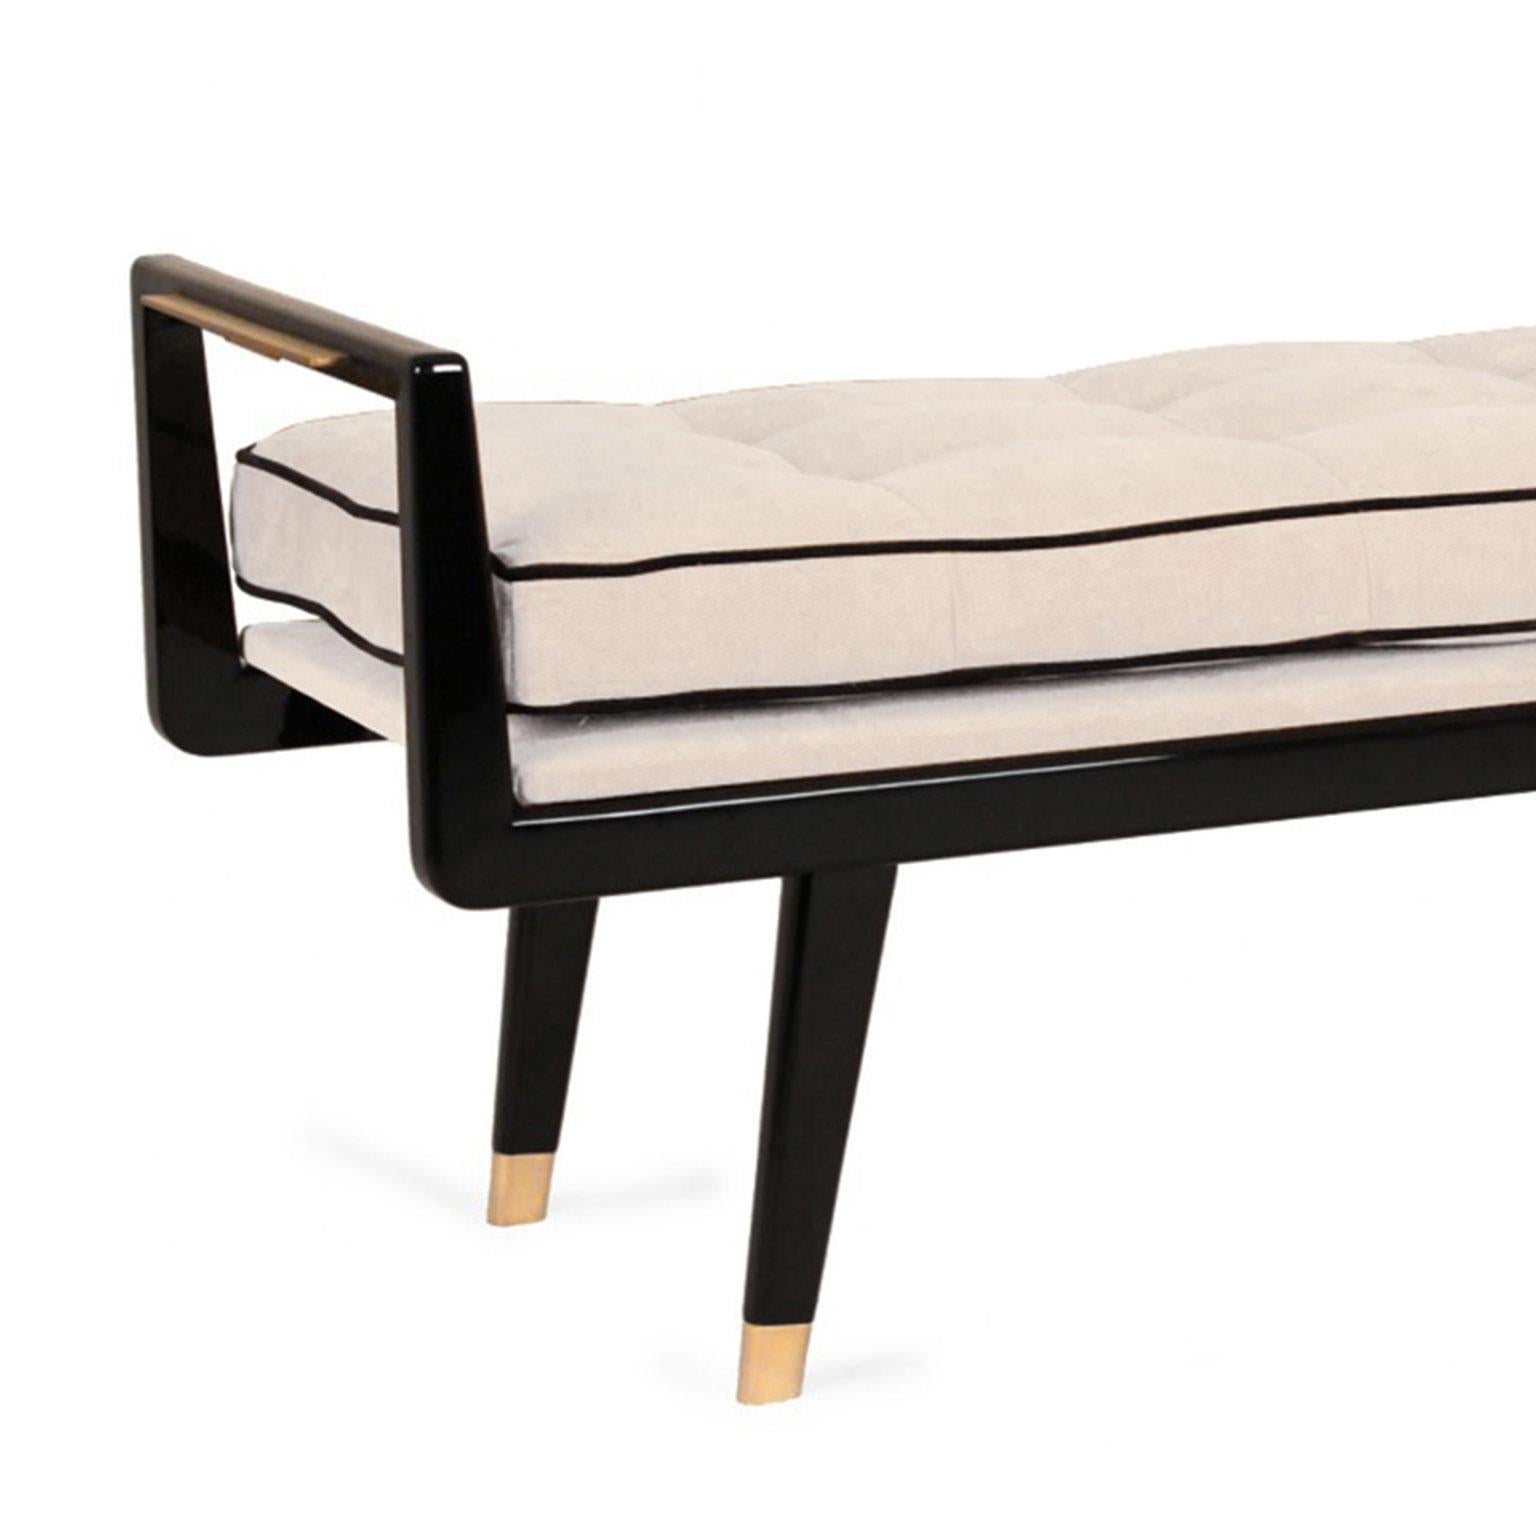 Clean-lined bench with angular frame and midcentury styling. The lacquered body features tapered legs enhanced with brushed brass feet caps. Sleek brass details also adorn each end. The upholstered seat is topped with a button tufted cushion with